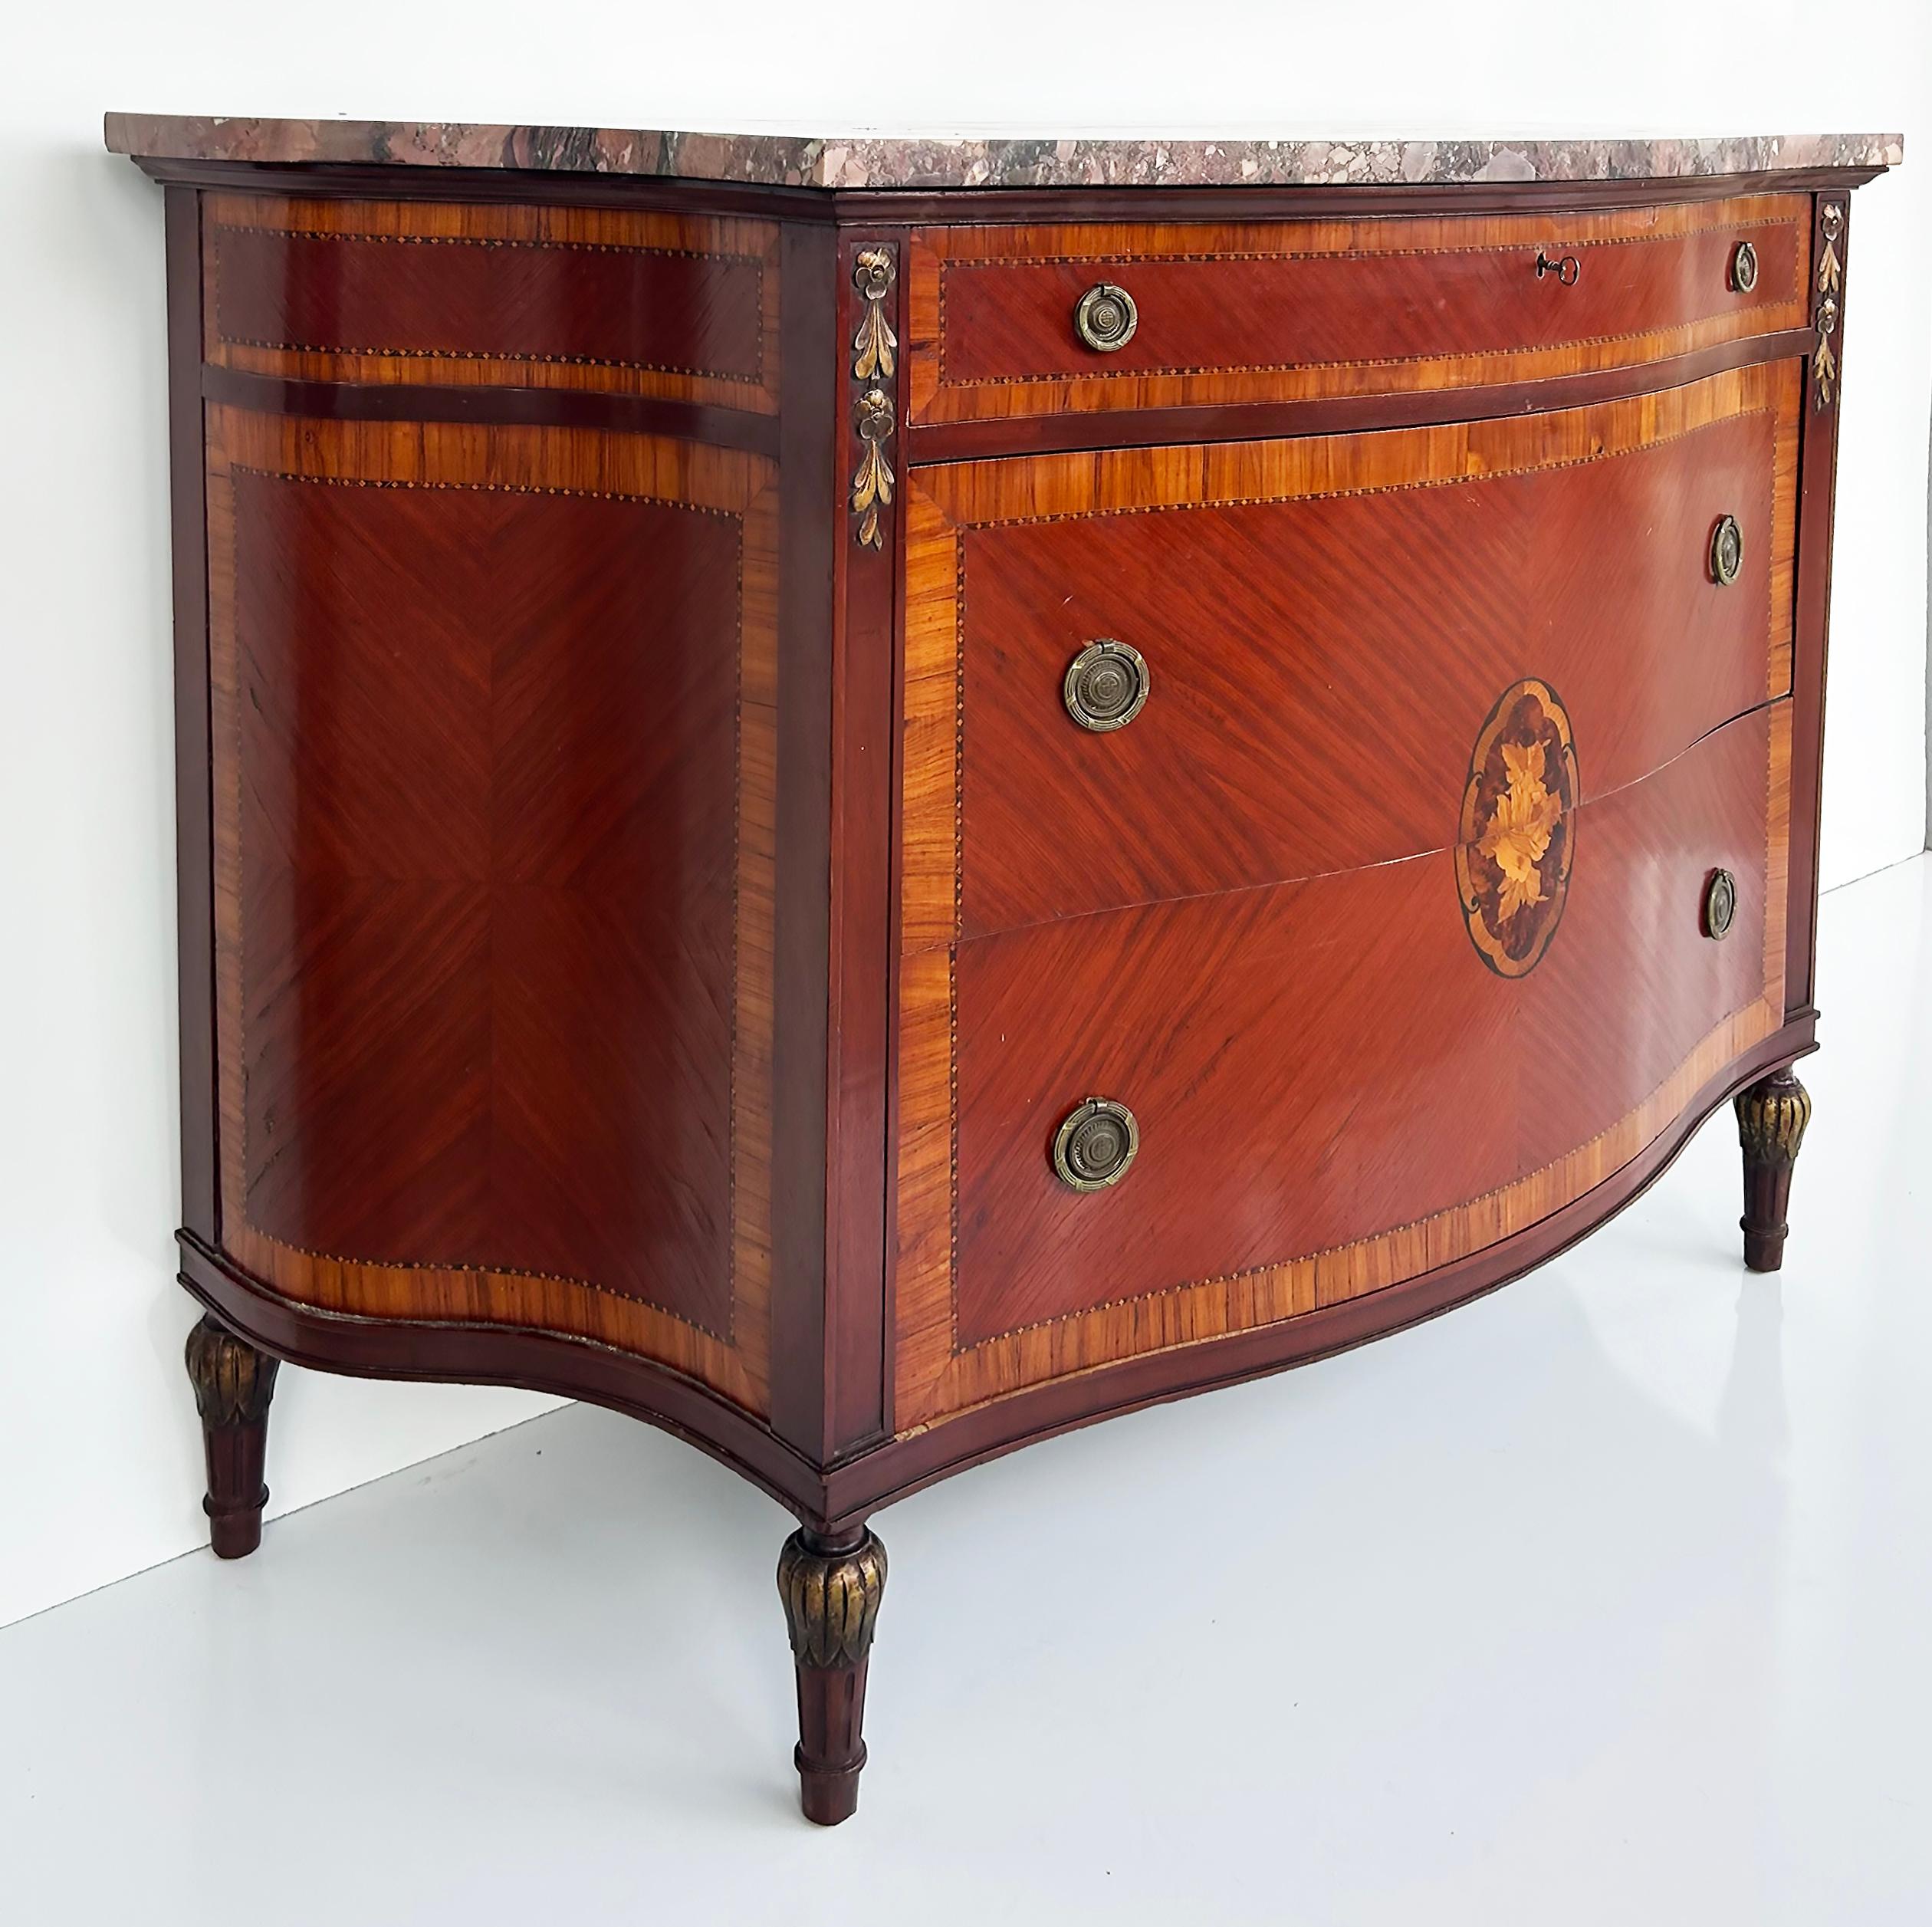 French Style 3-Drawer Chest of Drawers with Marble Top, Bronze and Marquetry

Offered for sale is a recent acquisition from a South Florida estate.  This French-style three-drawer marble top chest of drawers has wonderful marquetry with three